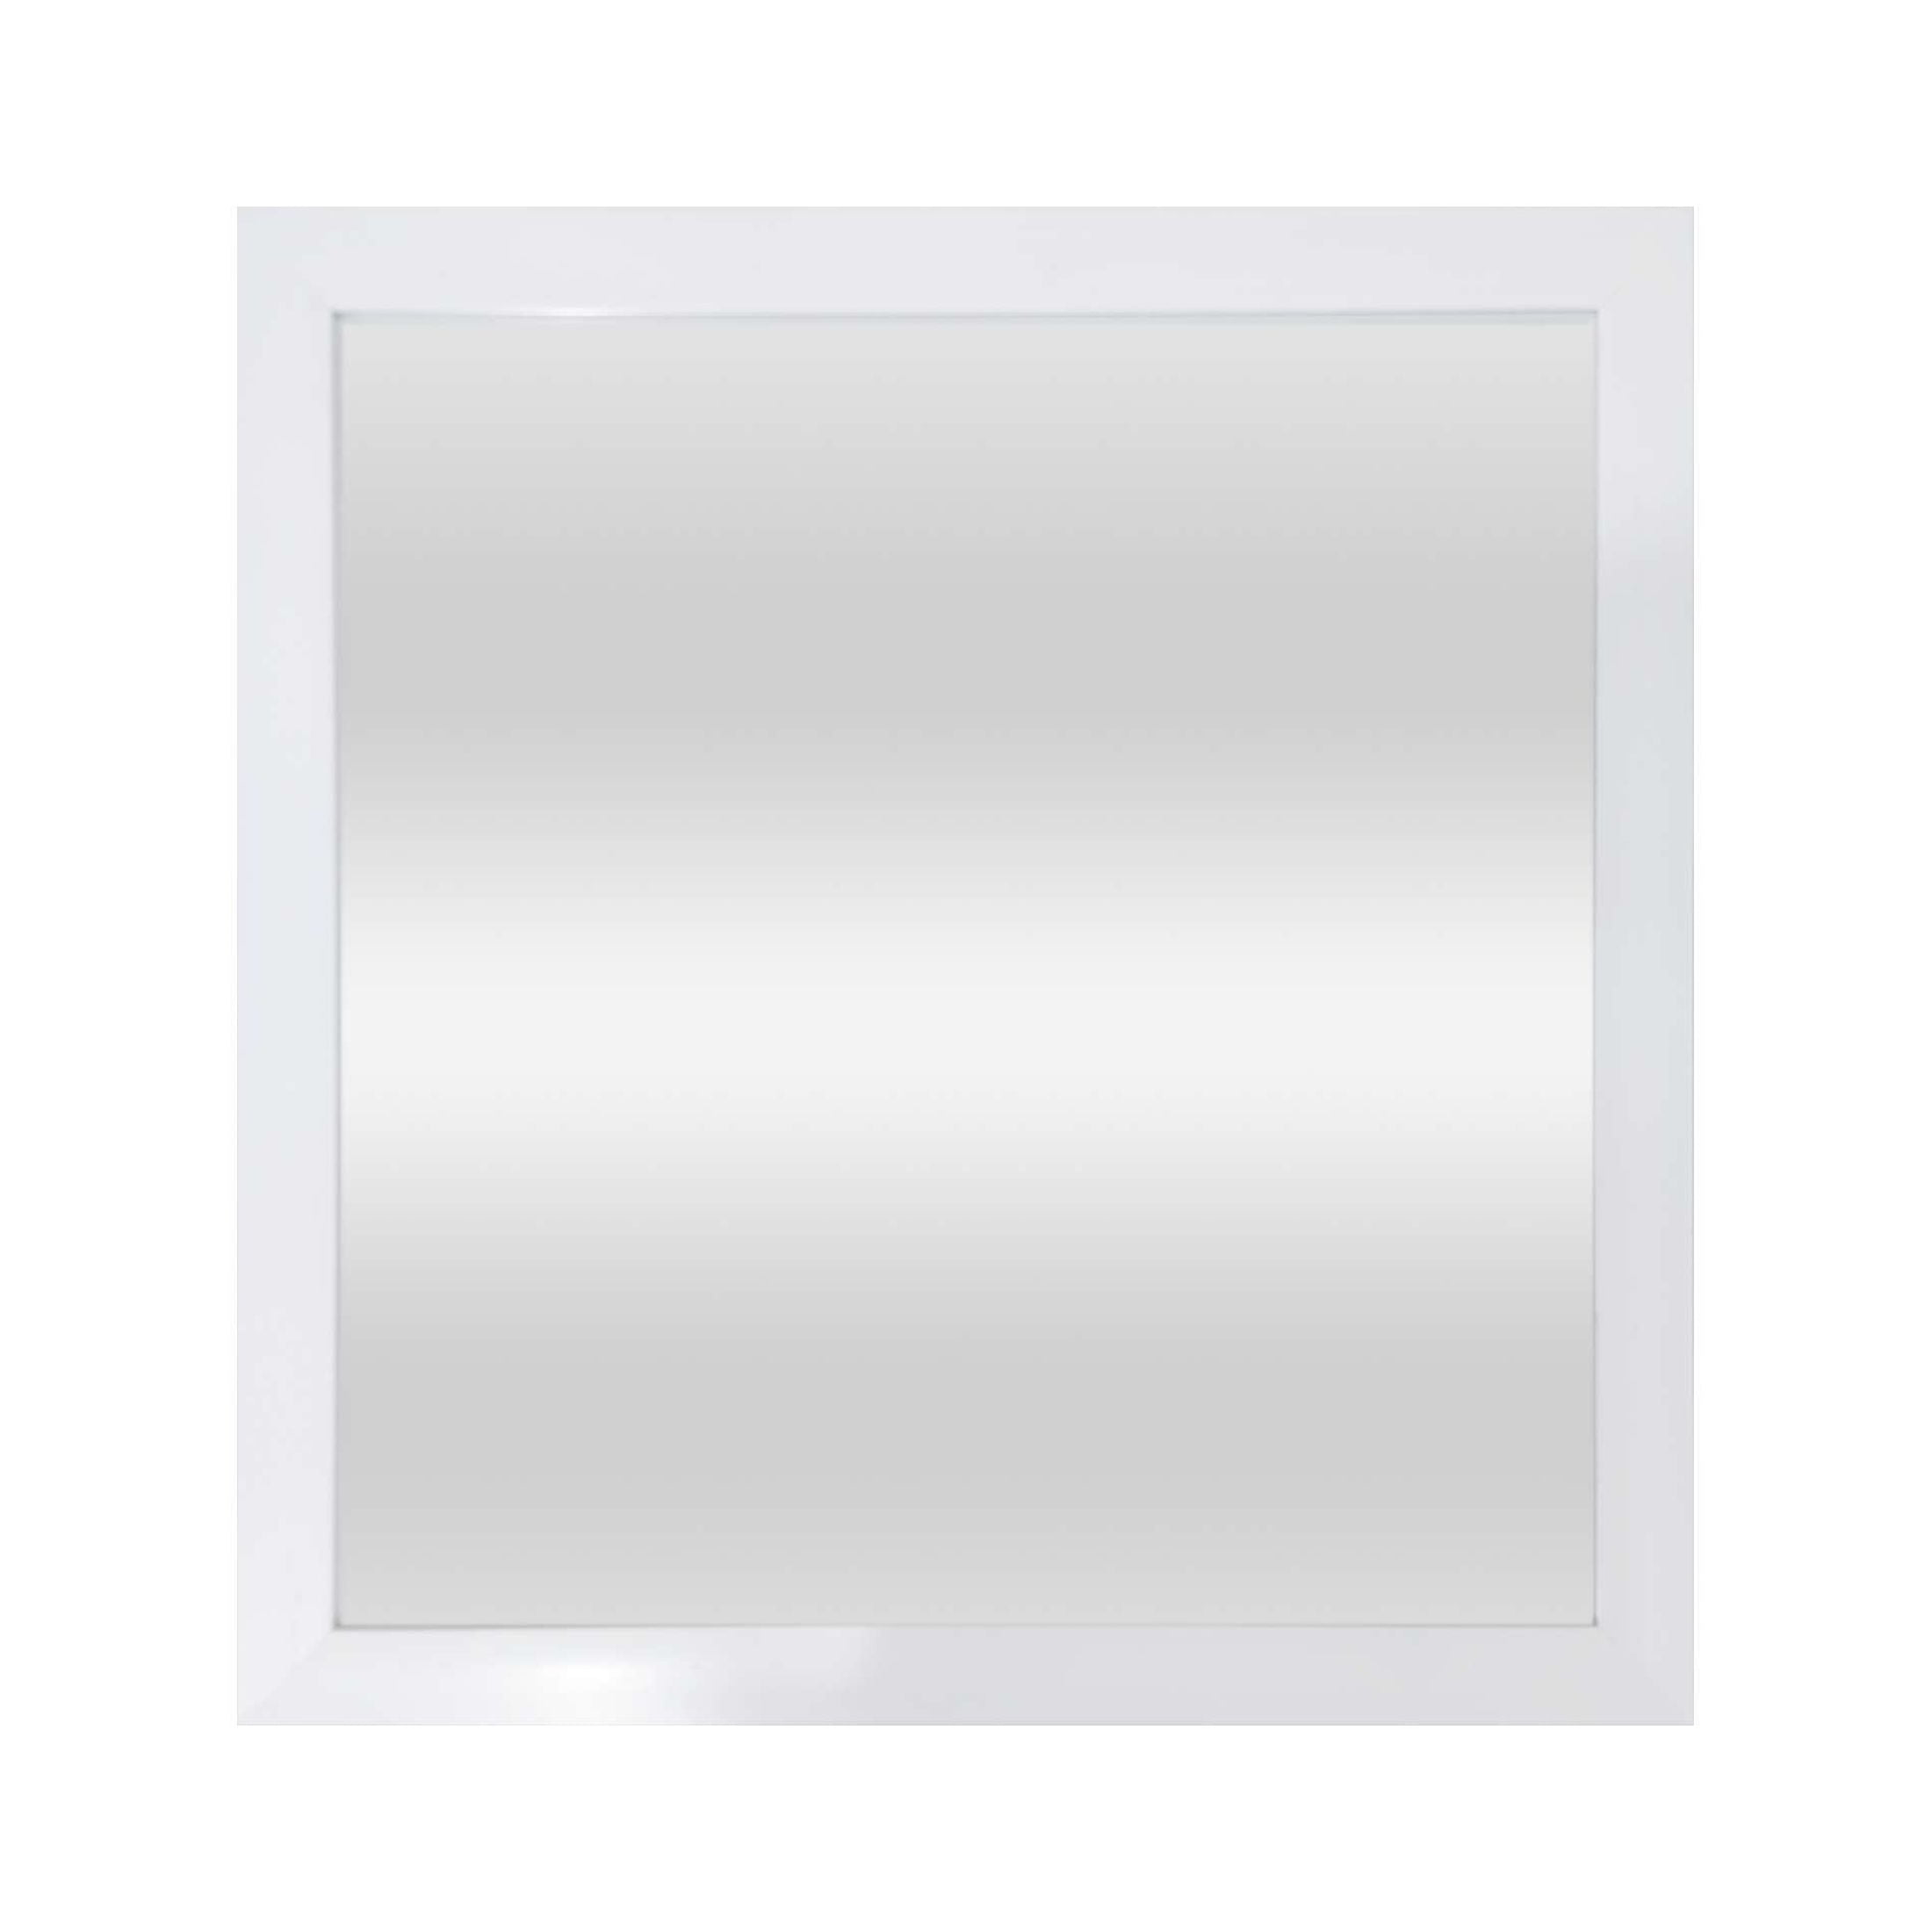 Mainstays Wall Mirror Square, 16In X 16In, Black 